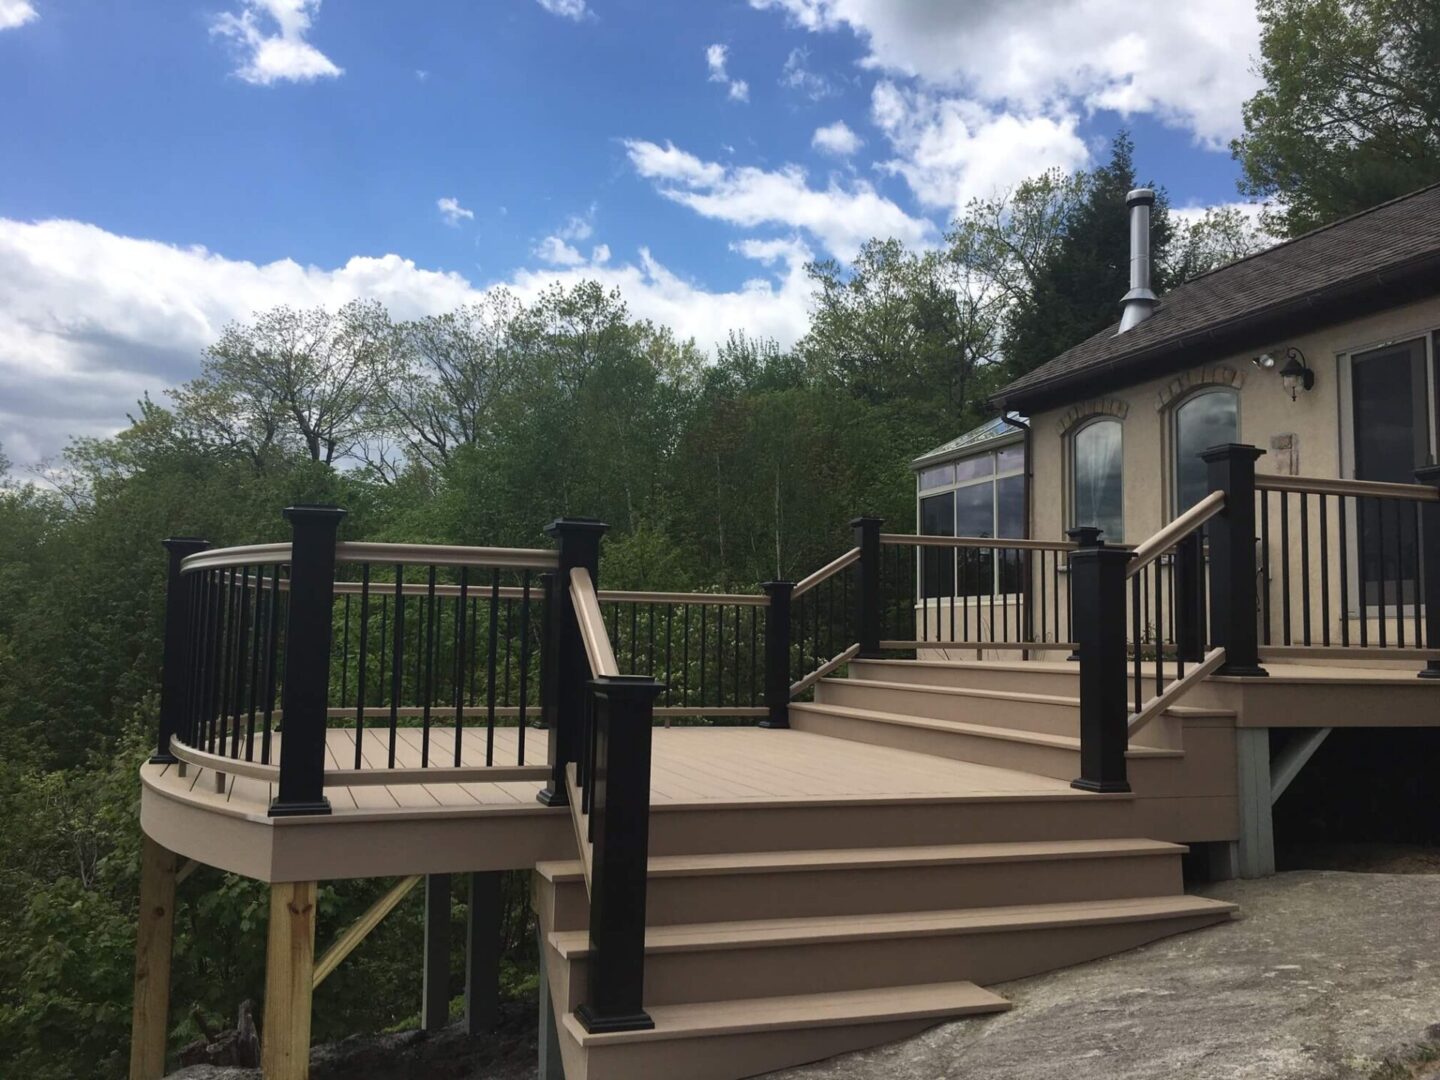 Outdoor deck and stairs of a one-story home